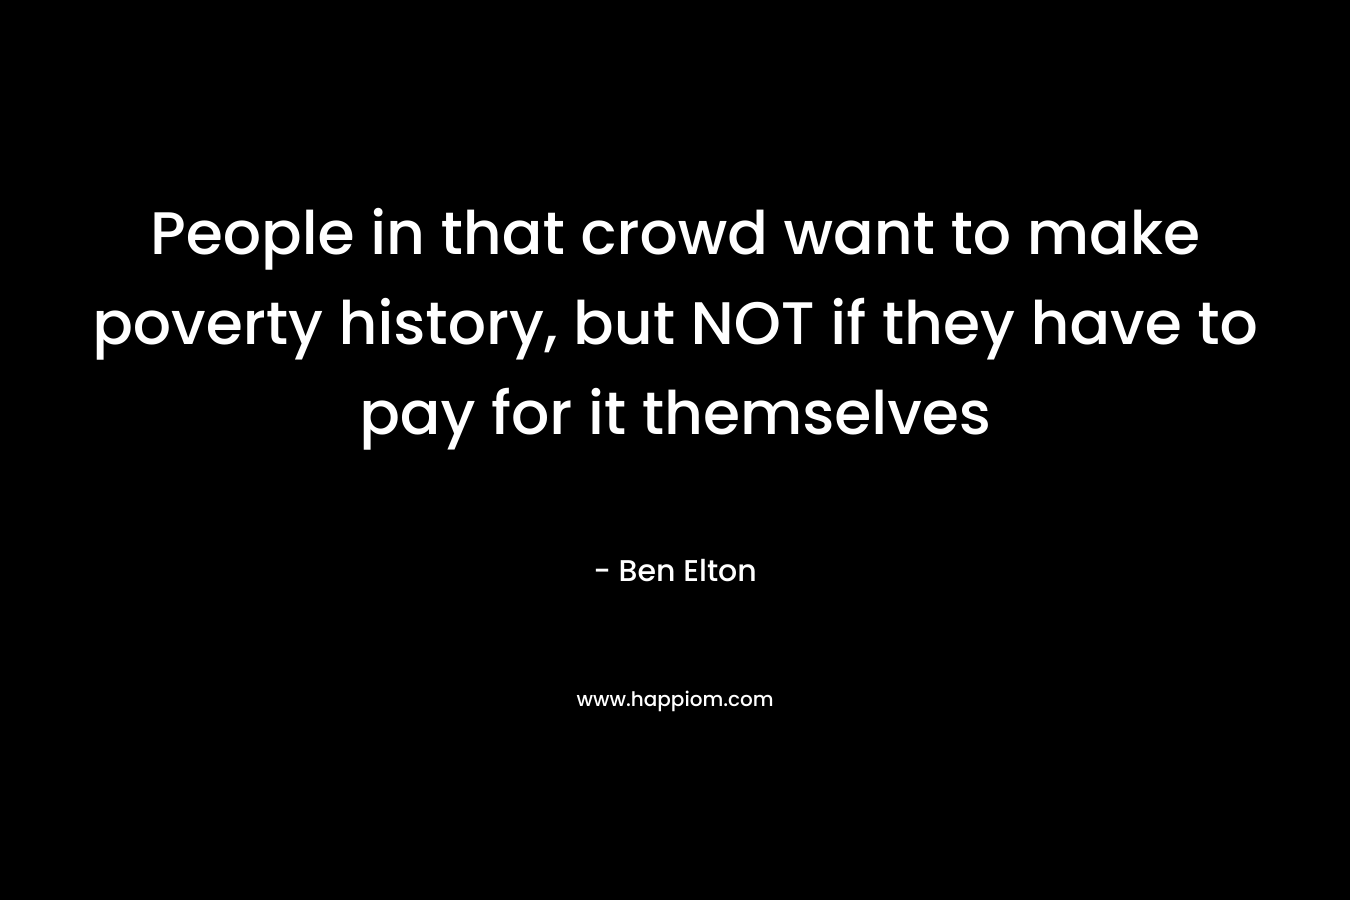 People in that crowd want to make poverty history, but NOT if they have to pay for it themselves